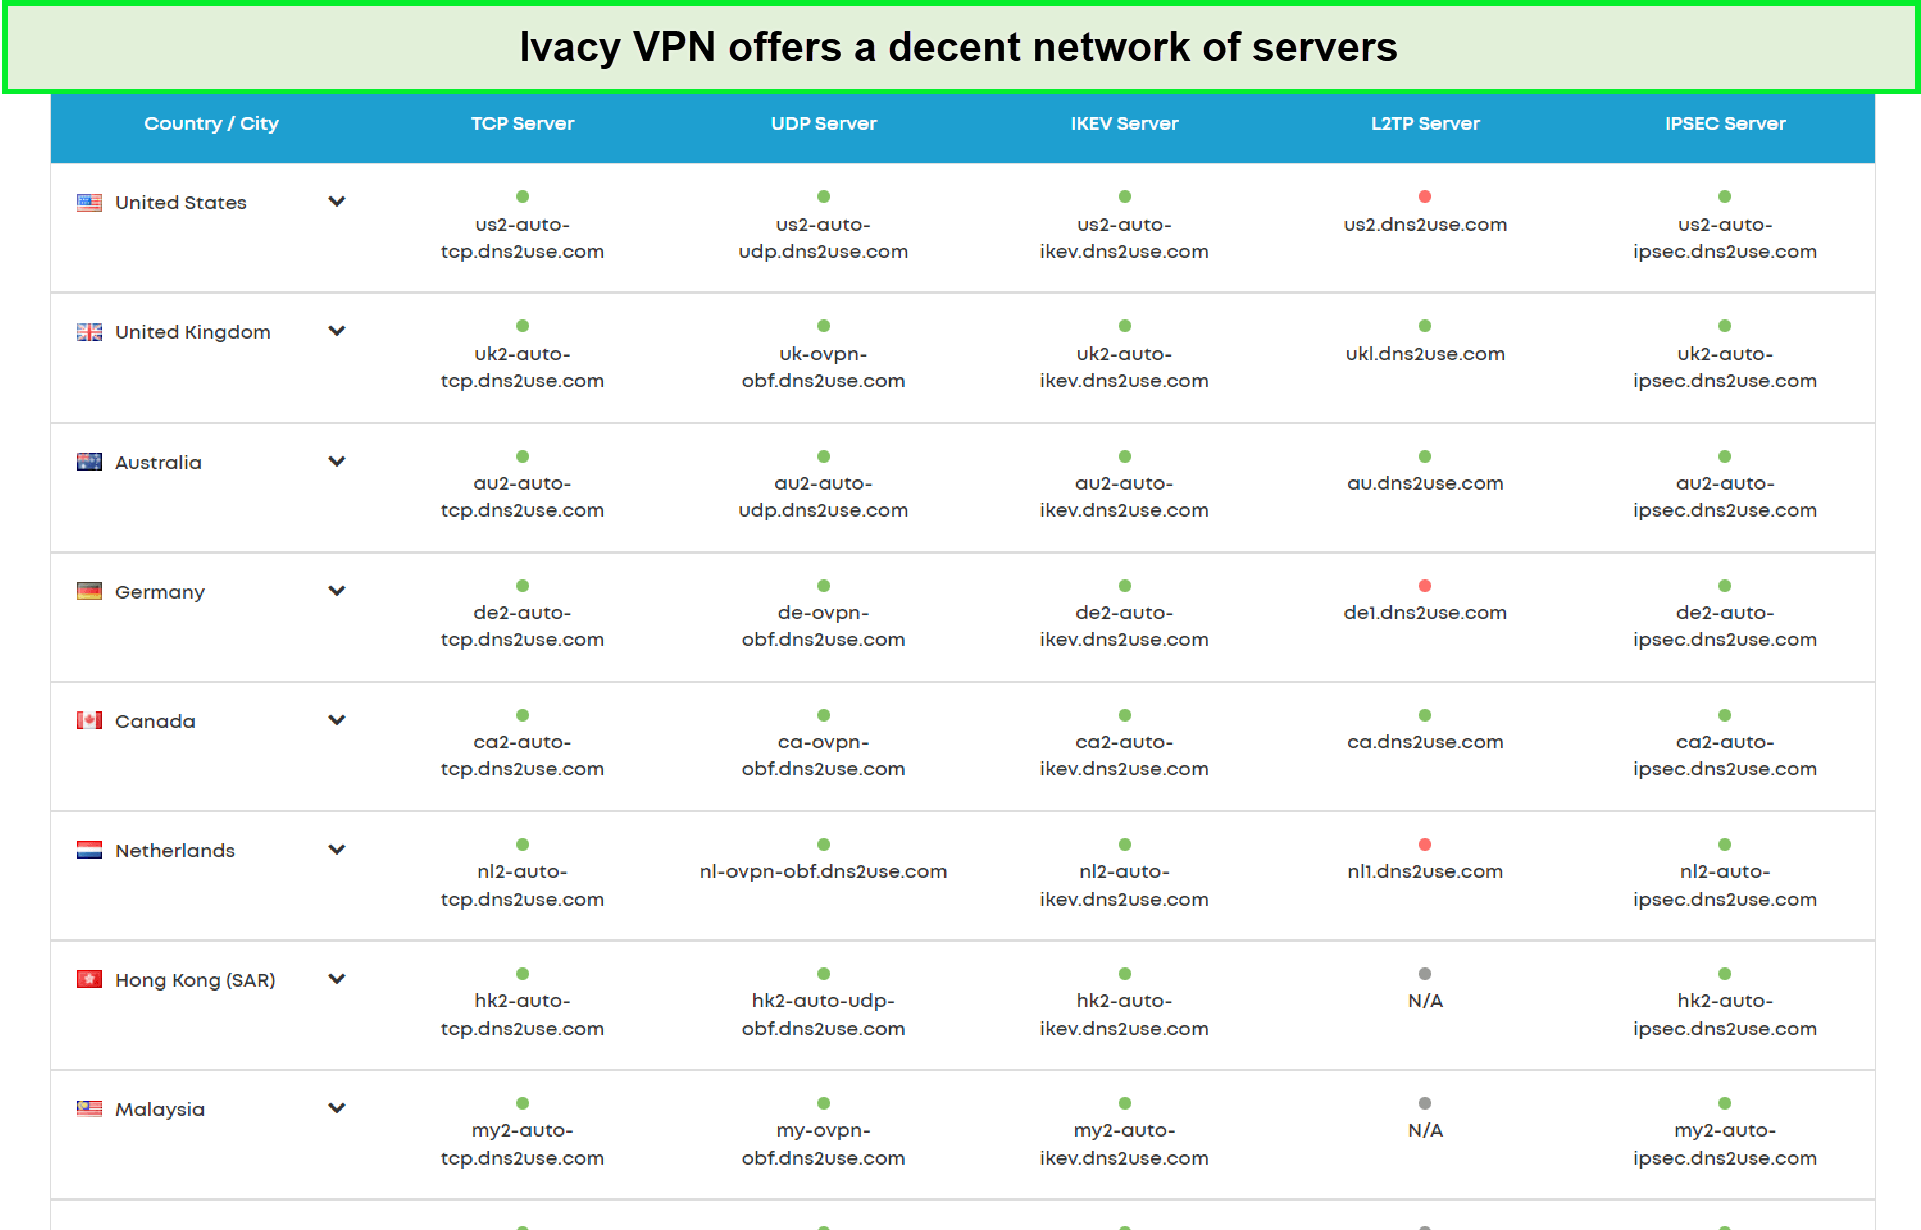 ivacy-server-network (1)